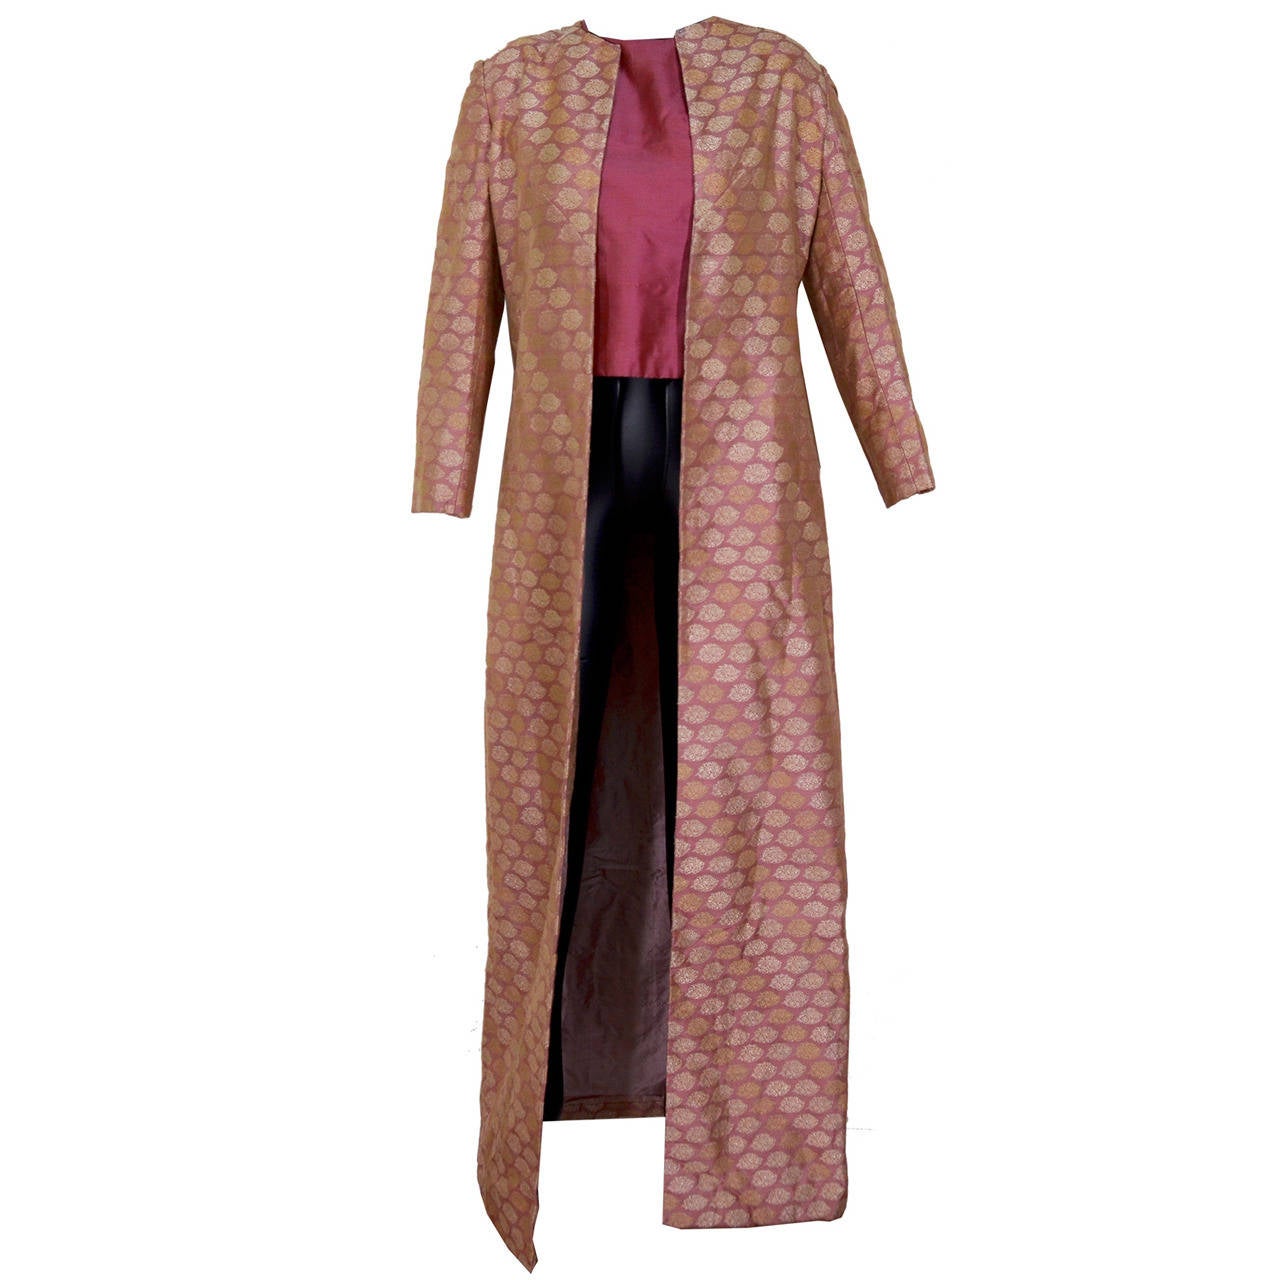 Glorious Virginia Witbeck Banaris Silk Coat with Coordinating Shell Top For Sale